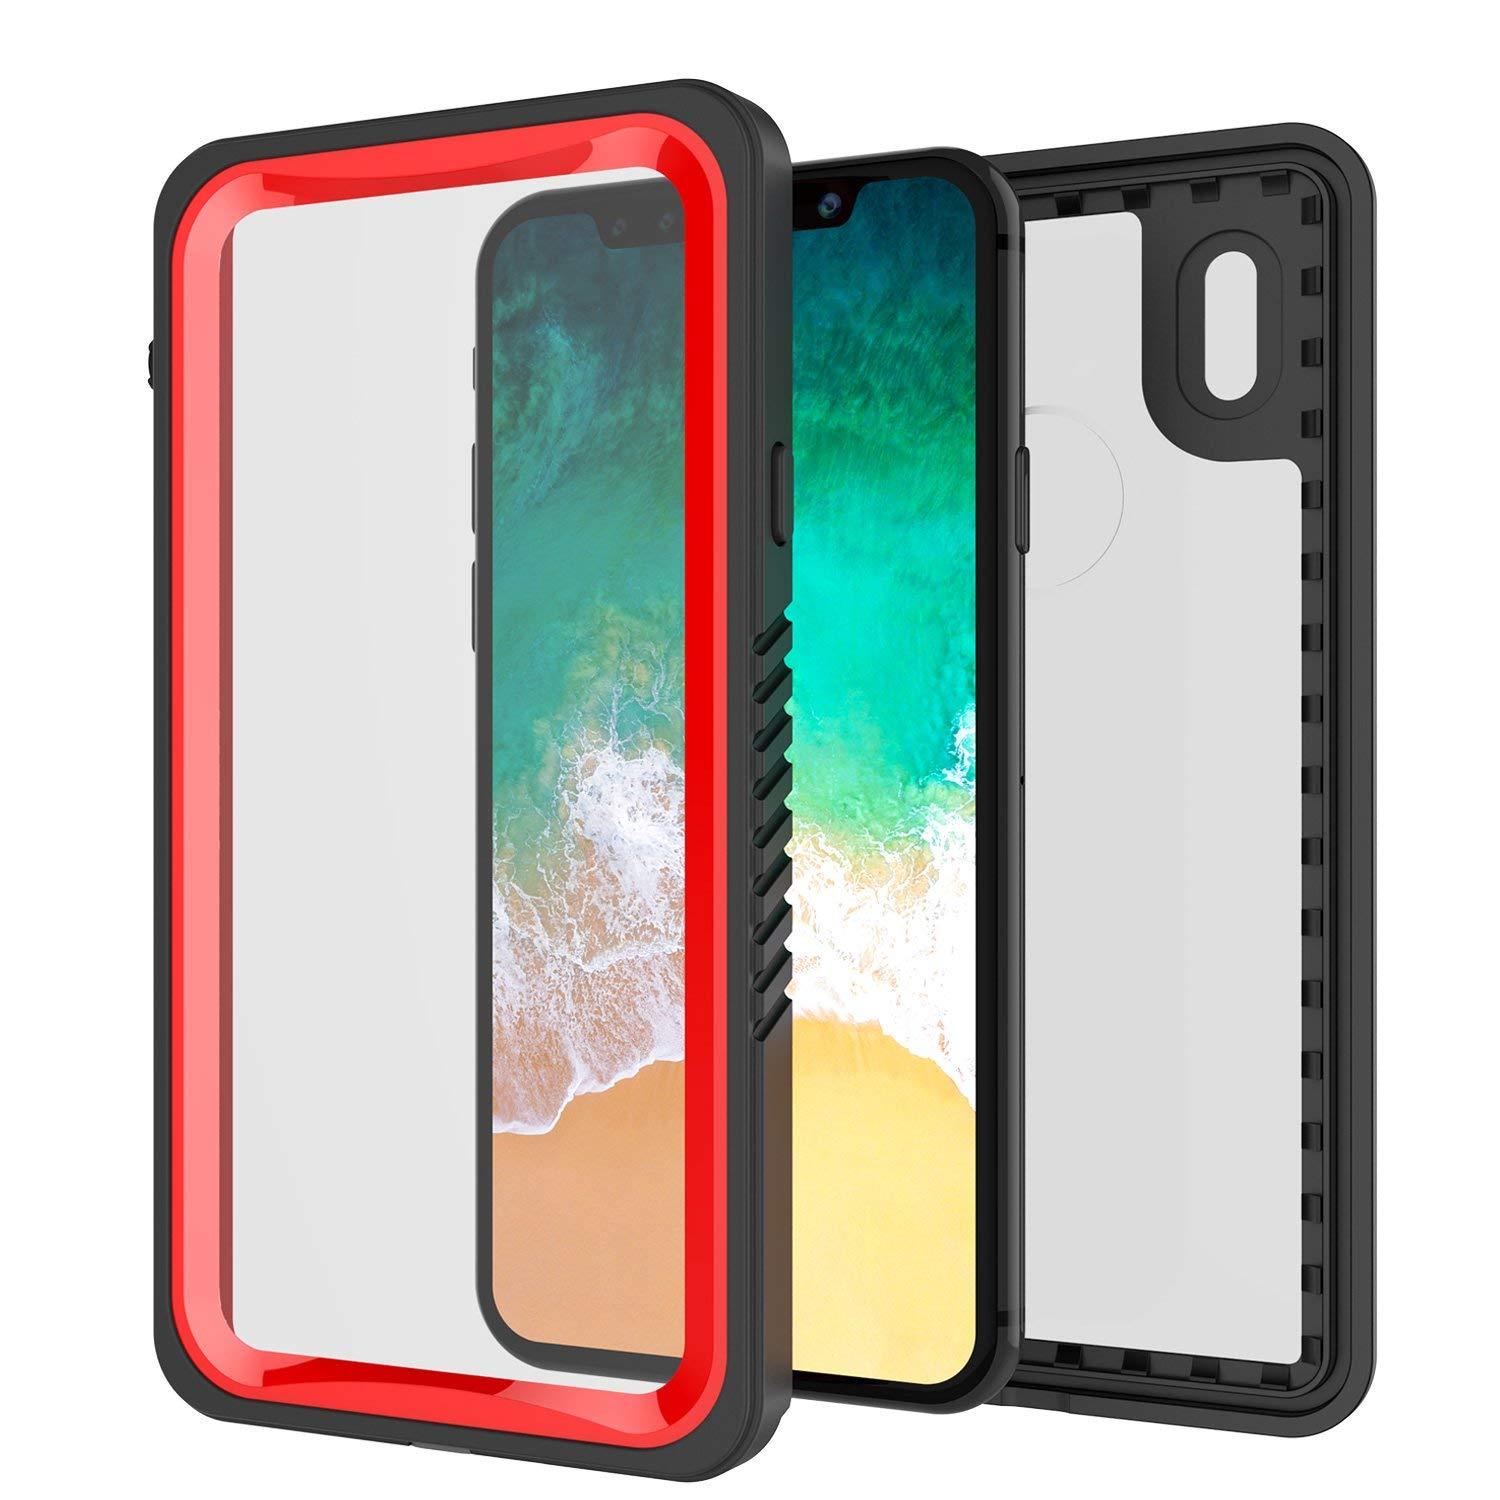 iPhone XS Max Waterproof Case, Punkcase [Extreme Series] Armor Cover W/ Built In Screen Protector [Clear]